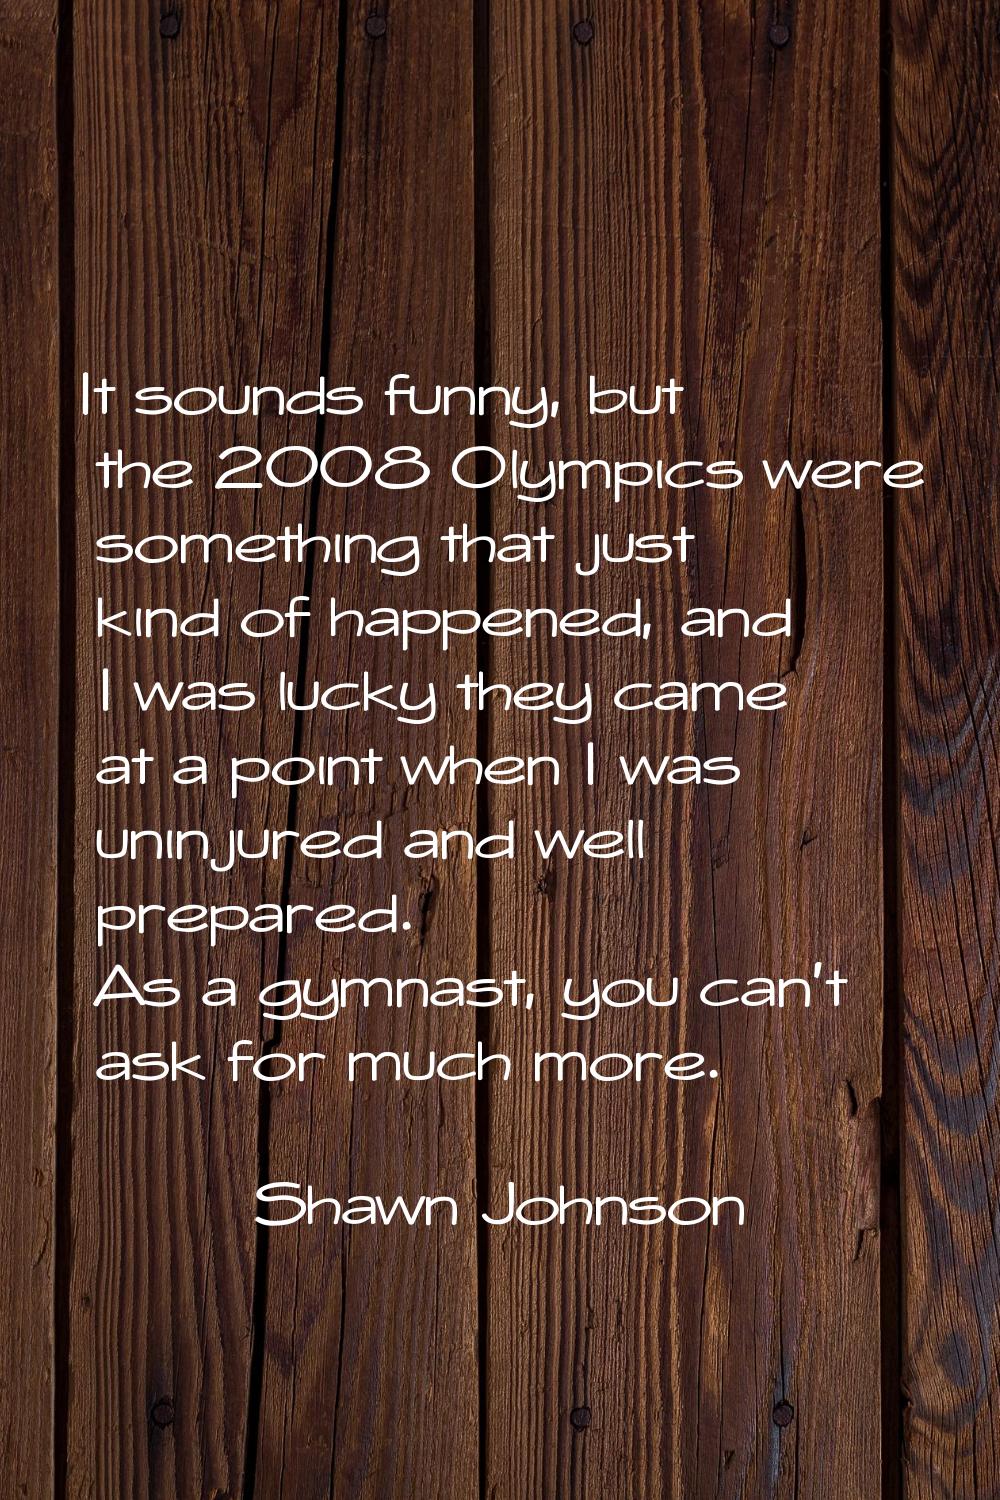 It sounds funny, but the 2008 Olympics were something that just kind of happened, and I was lucky t